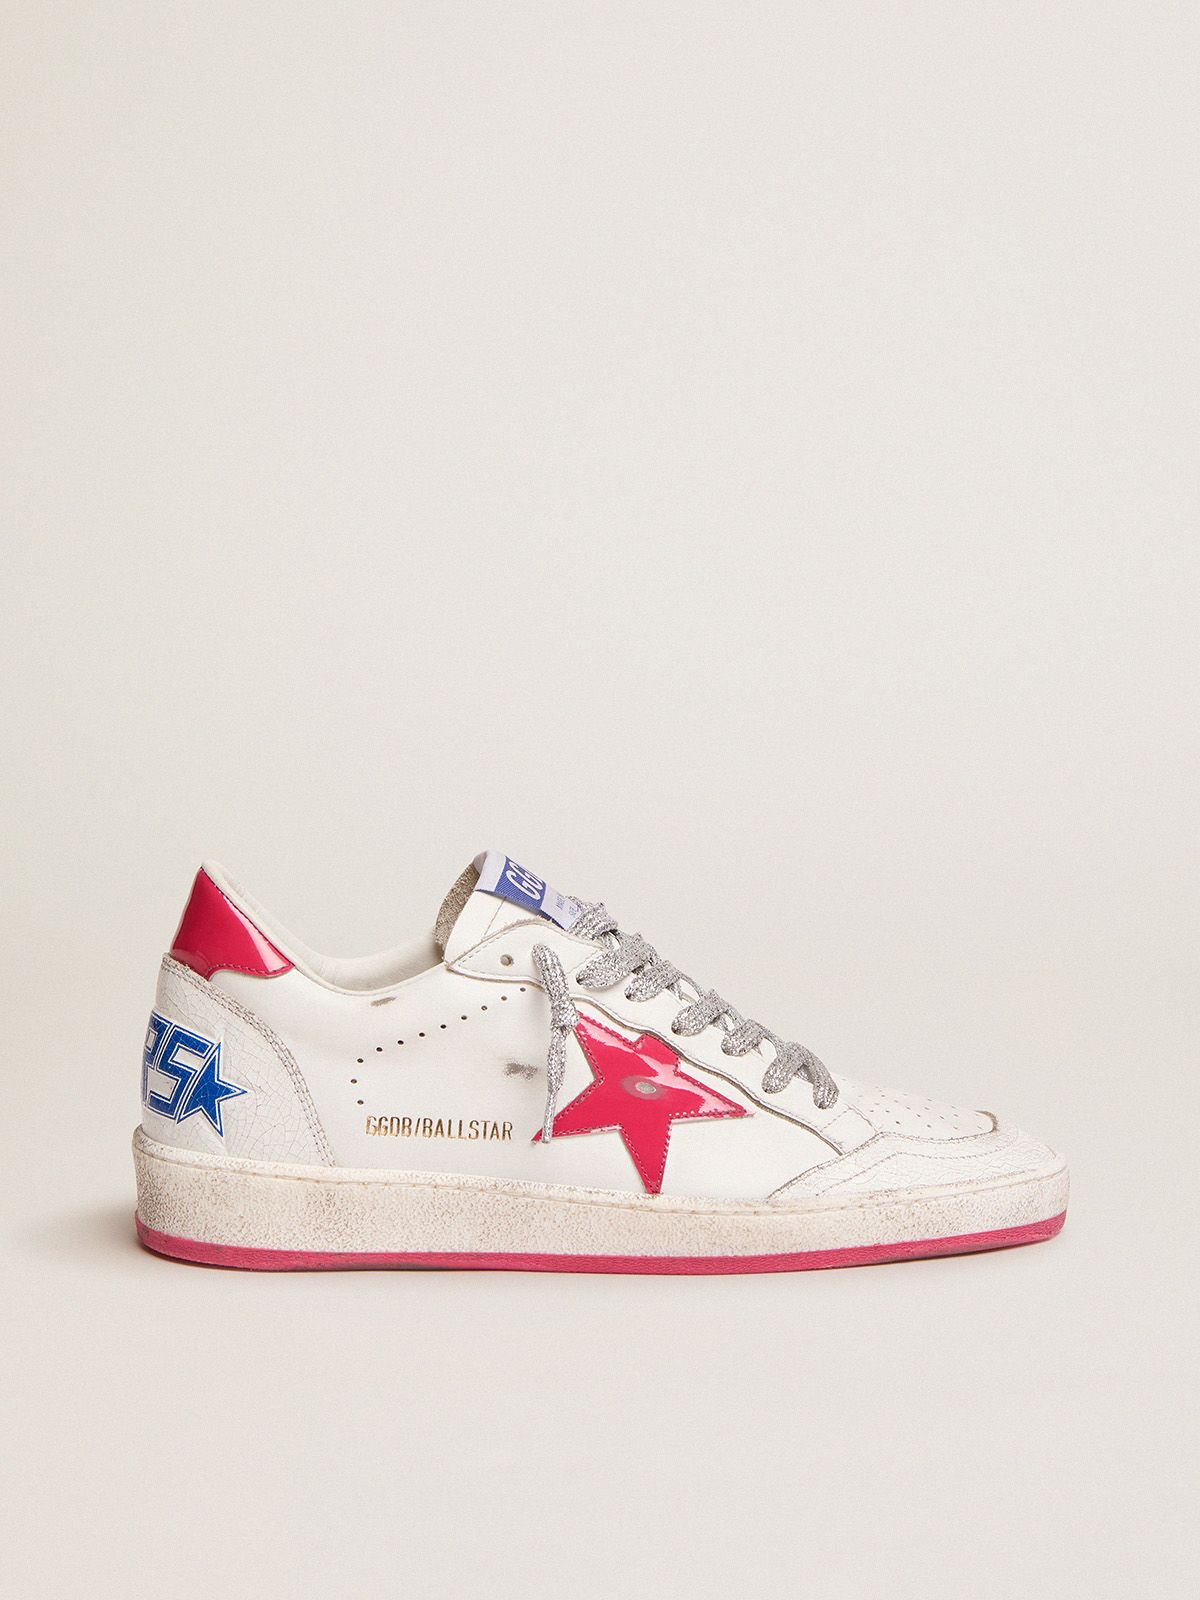 Golden Goose Sneakers Donna Ball Star LTD sneakers in white leather with red patent leather detail